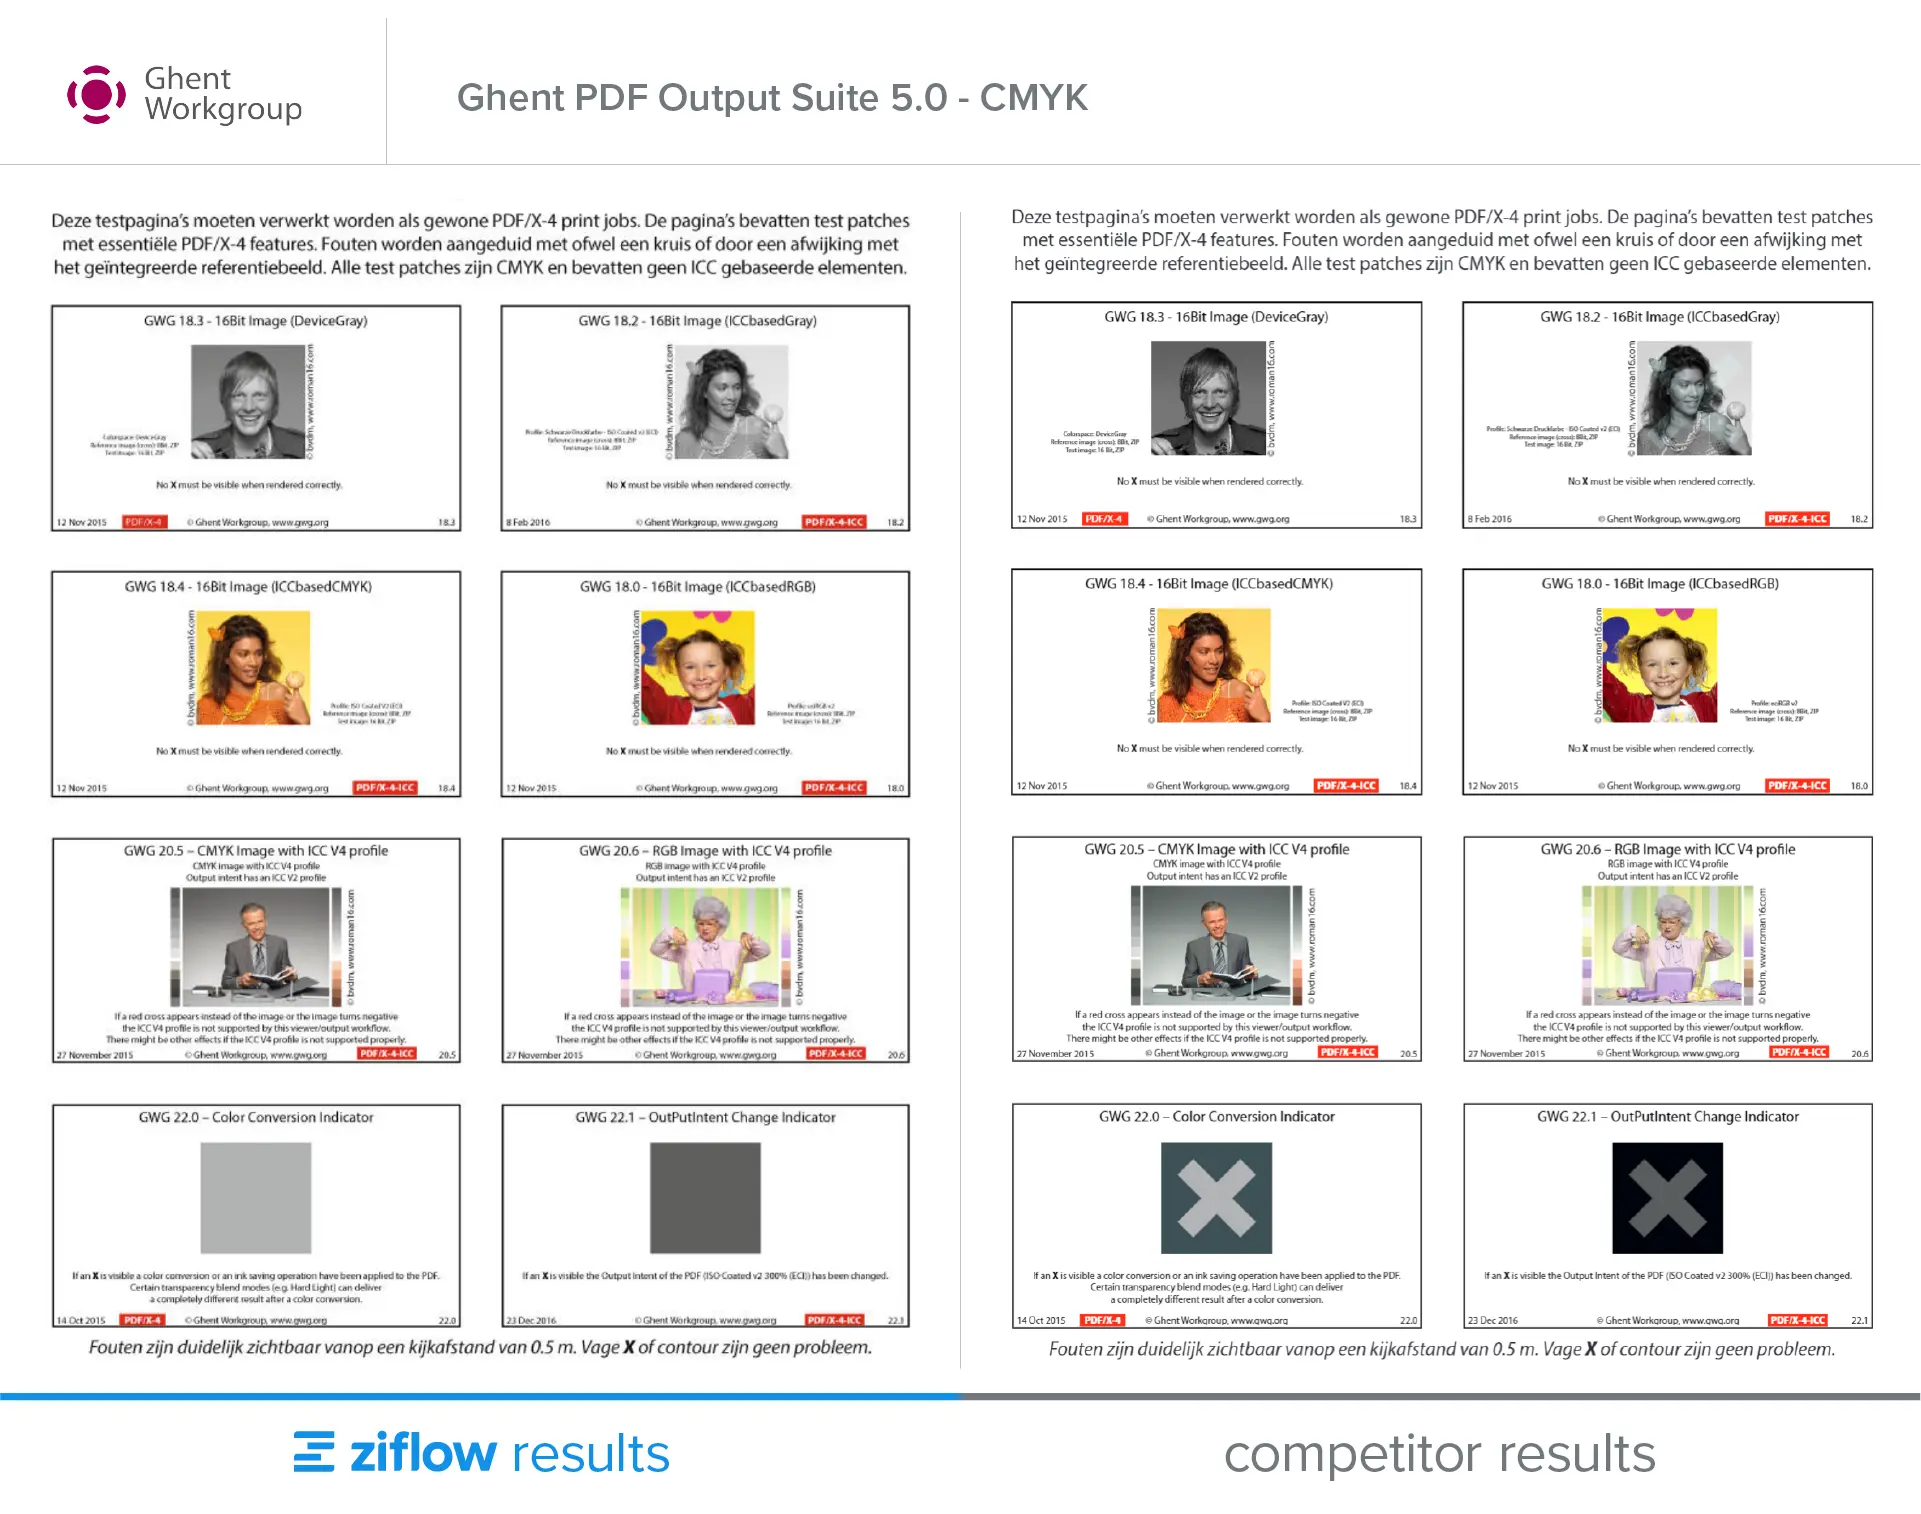 ghent pdf output suite cmyk - competitor results